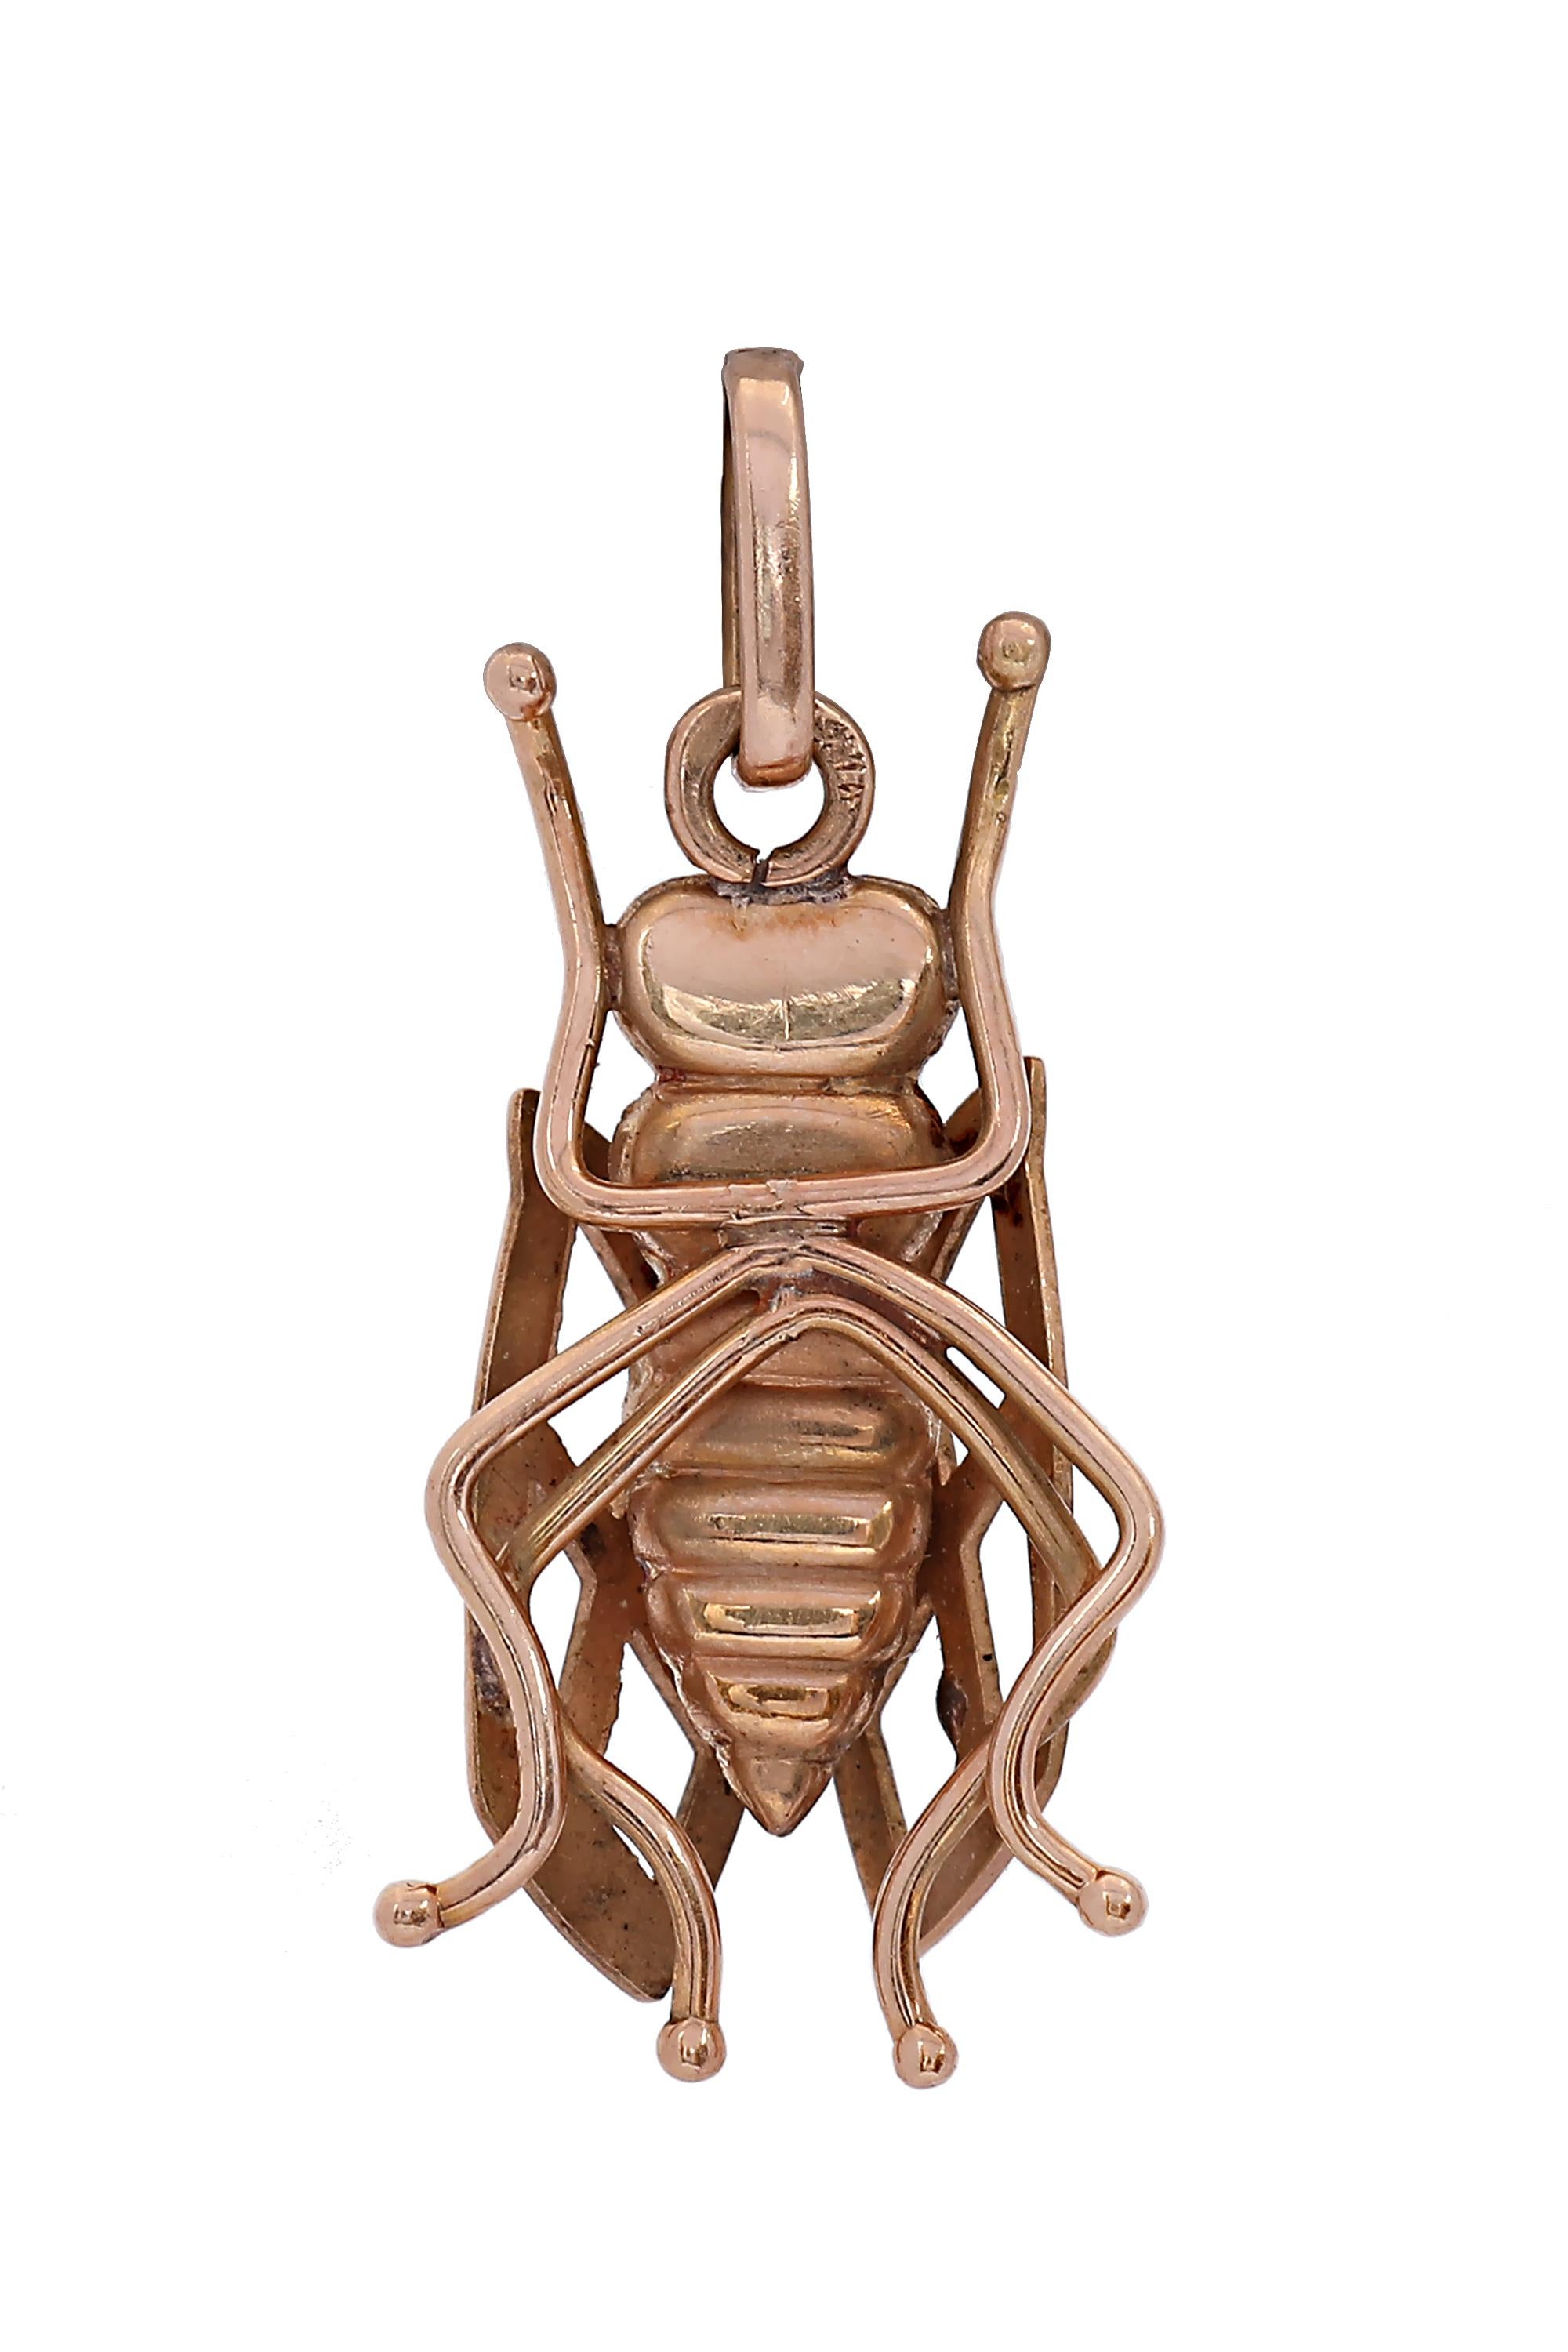 A stylized insect pendant crafted in 14K yellow gold. Unexpected and very striking! Measuring 0.5 inch wide and 0.75 inch long.